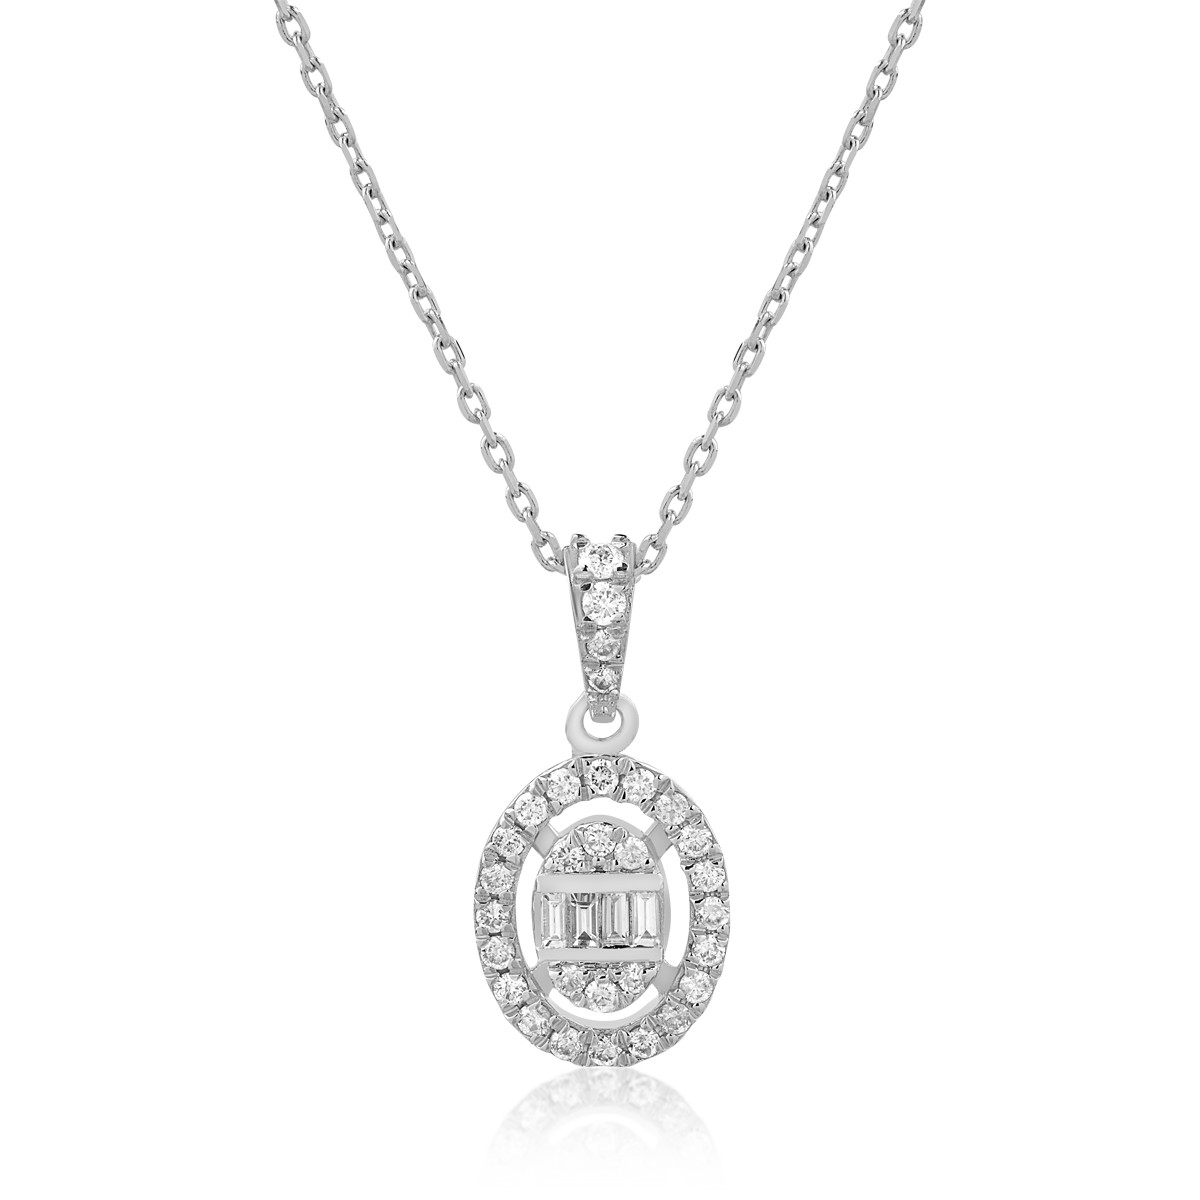 18K white gold pendant necklace with 0.19ct diamonds